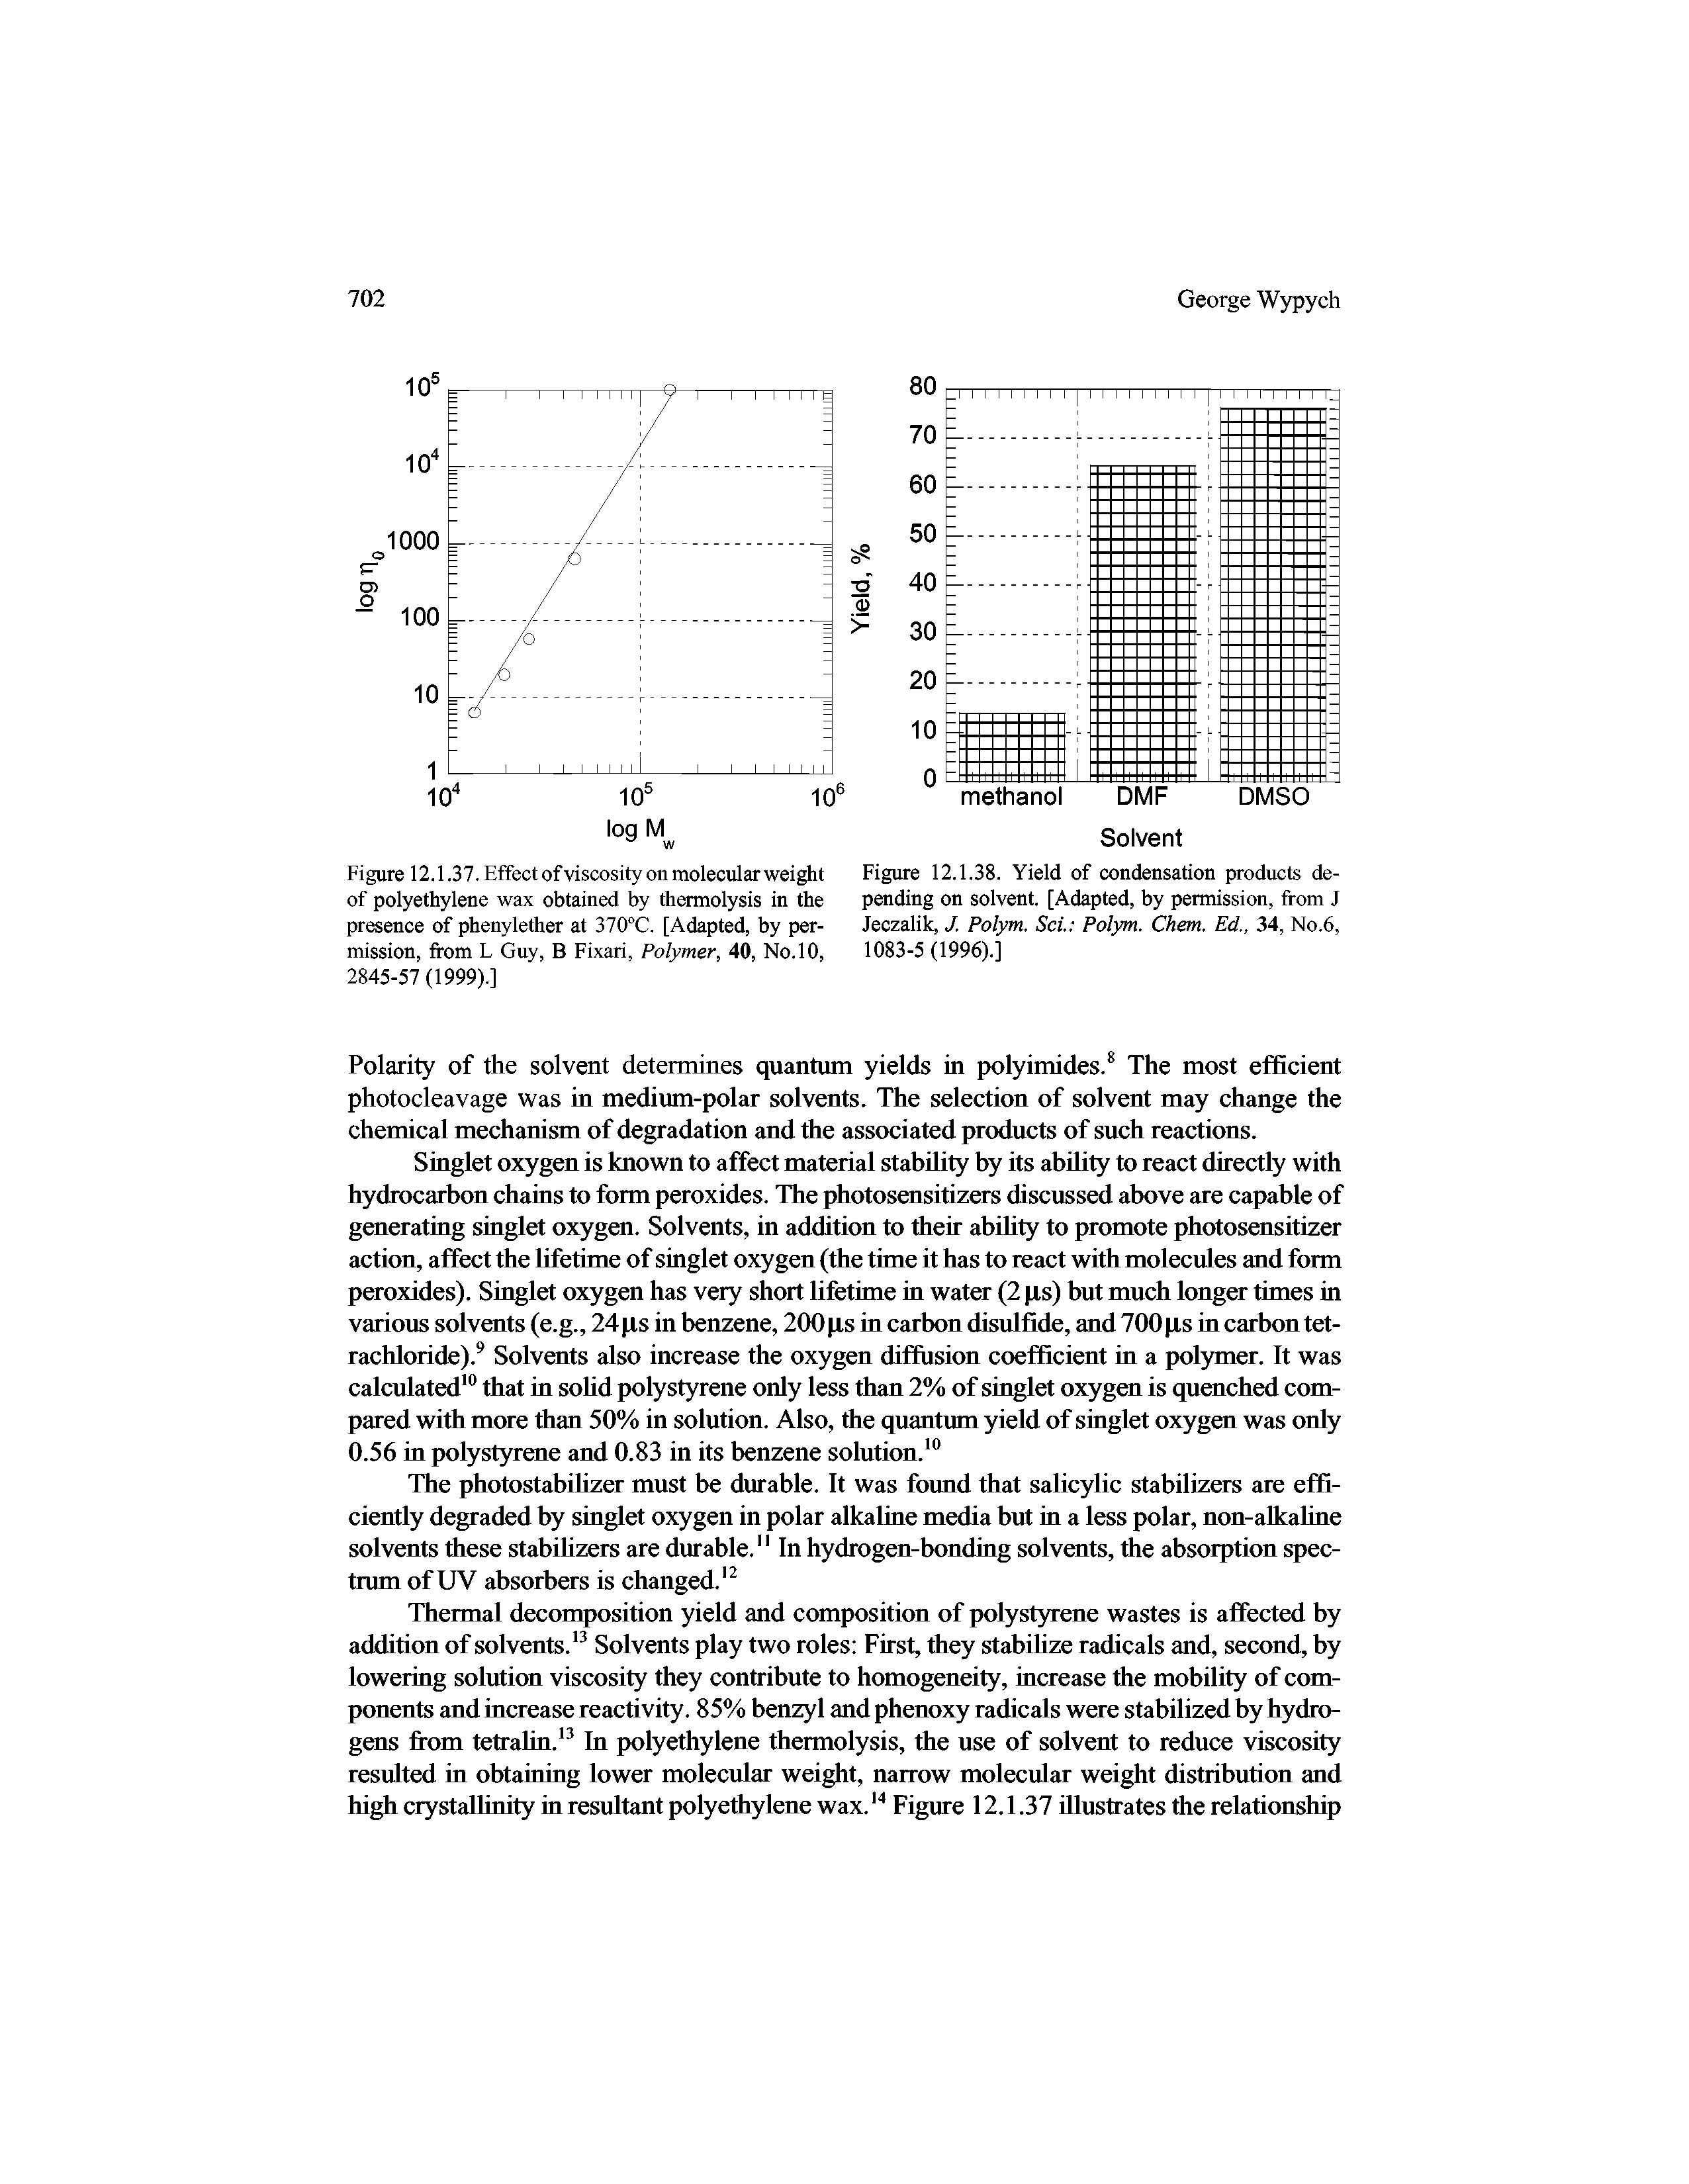 Figure 12.1.37. Effect ofviscosity on molecular weight of polyethylene wax obtained by thermolysis in the presence of phenylether at 370 C. [Adapted, by permission, from L Guy, B Fixari, Polymer, 40, No.lO, 2845-57 (1999).]...